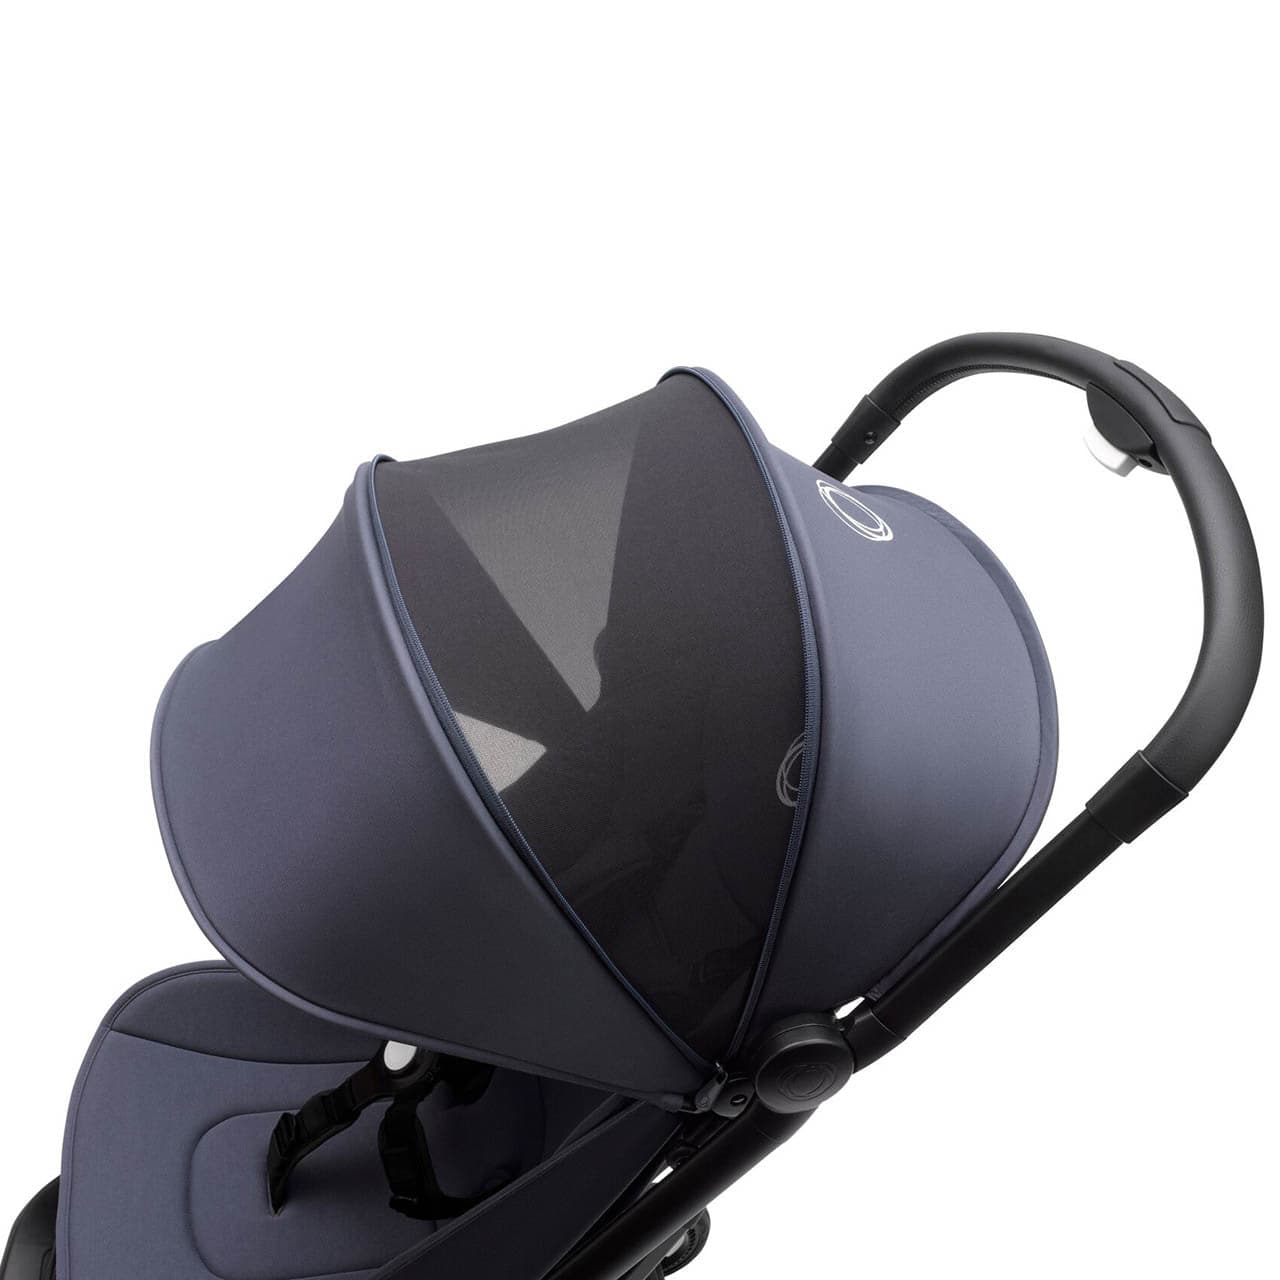 Bugaboo Butterfly Stroller - Stormy Blue - For Your Little One